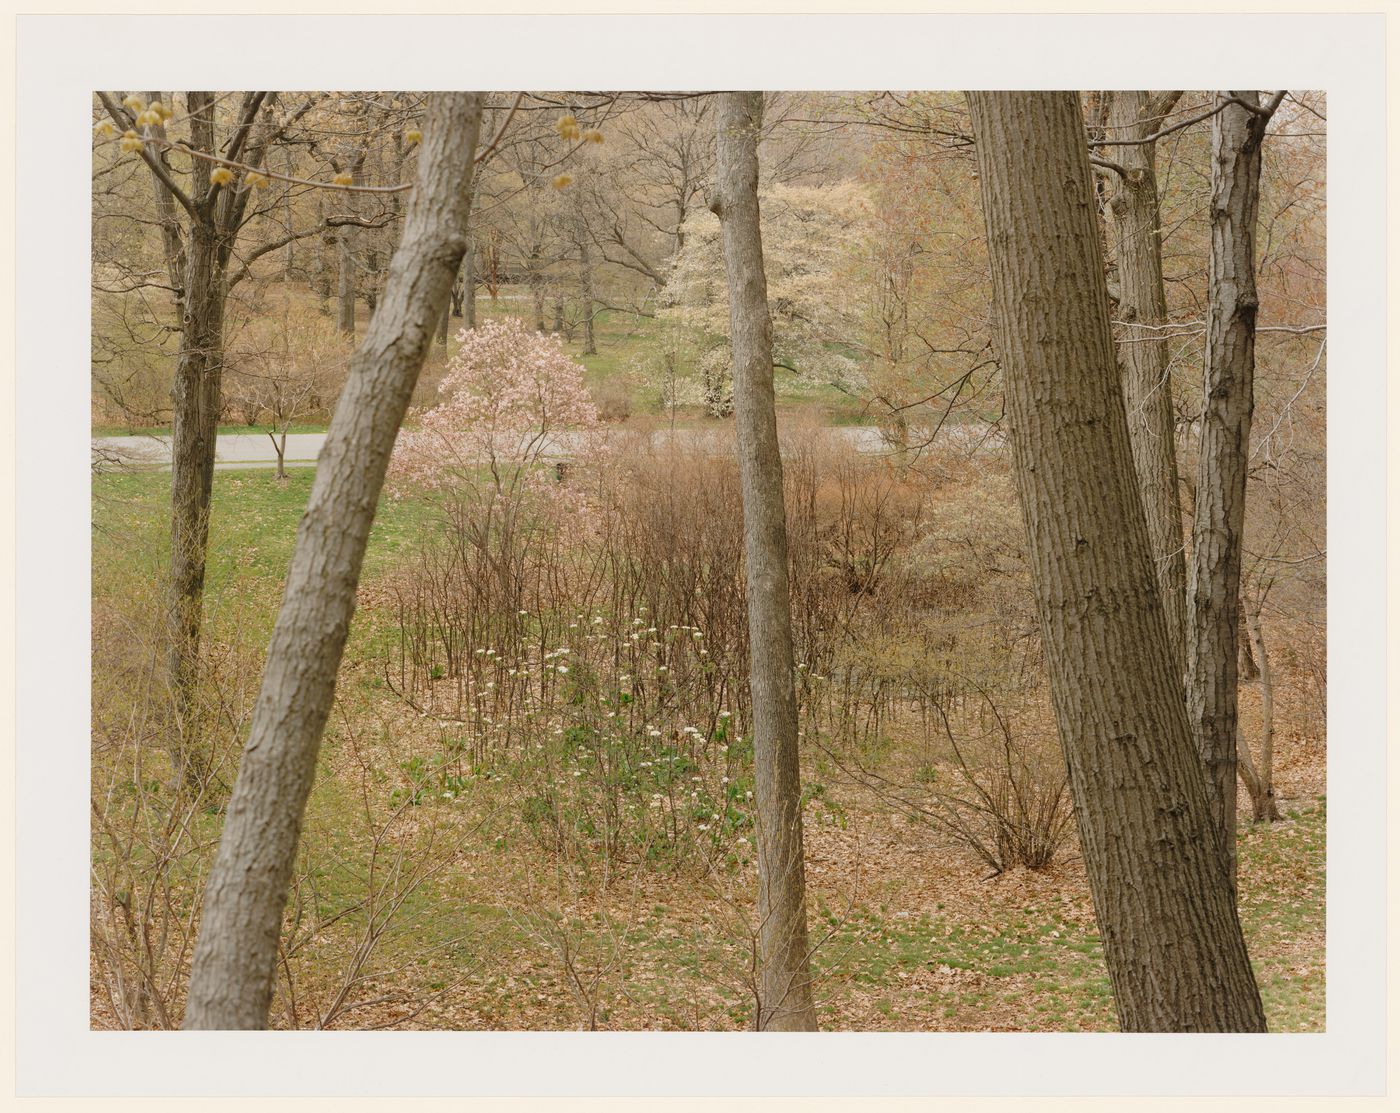 Viewing Olmsted: View of The Arnold Arboretum, Boston, Massachusetts